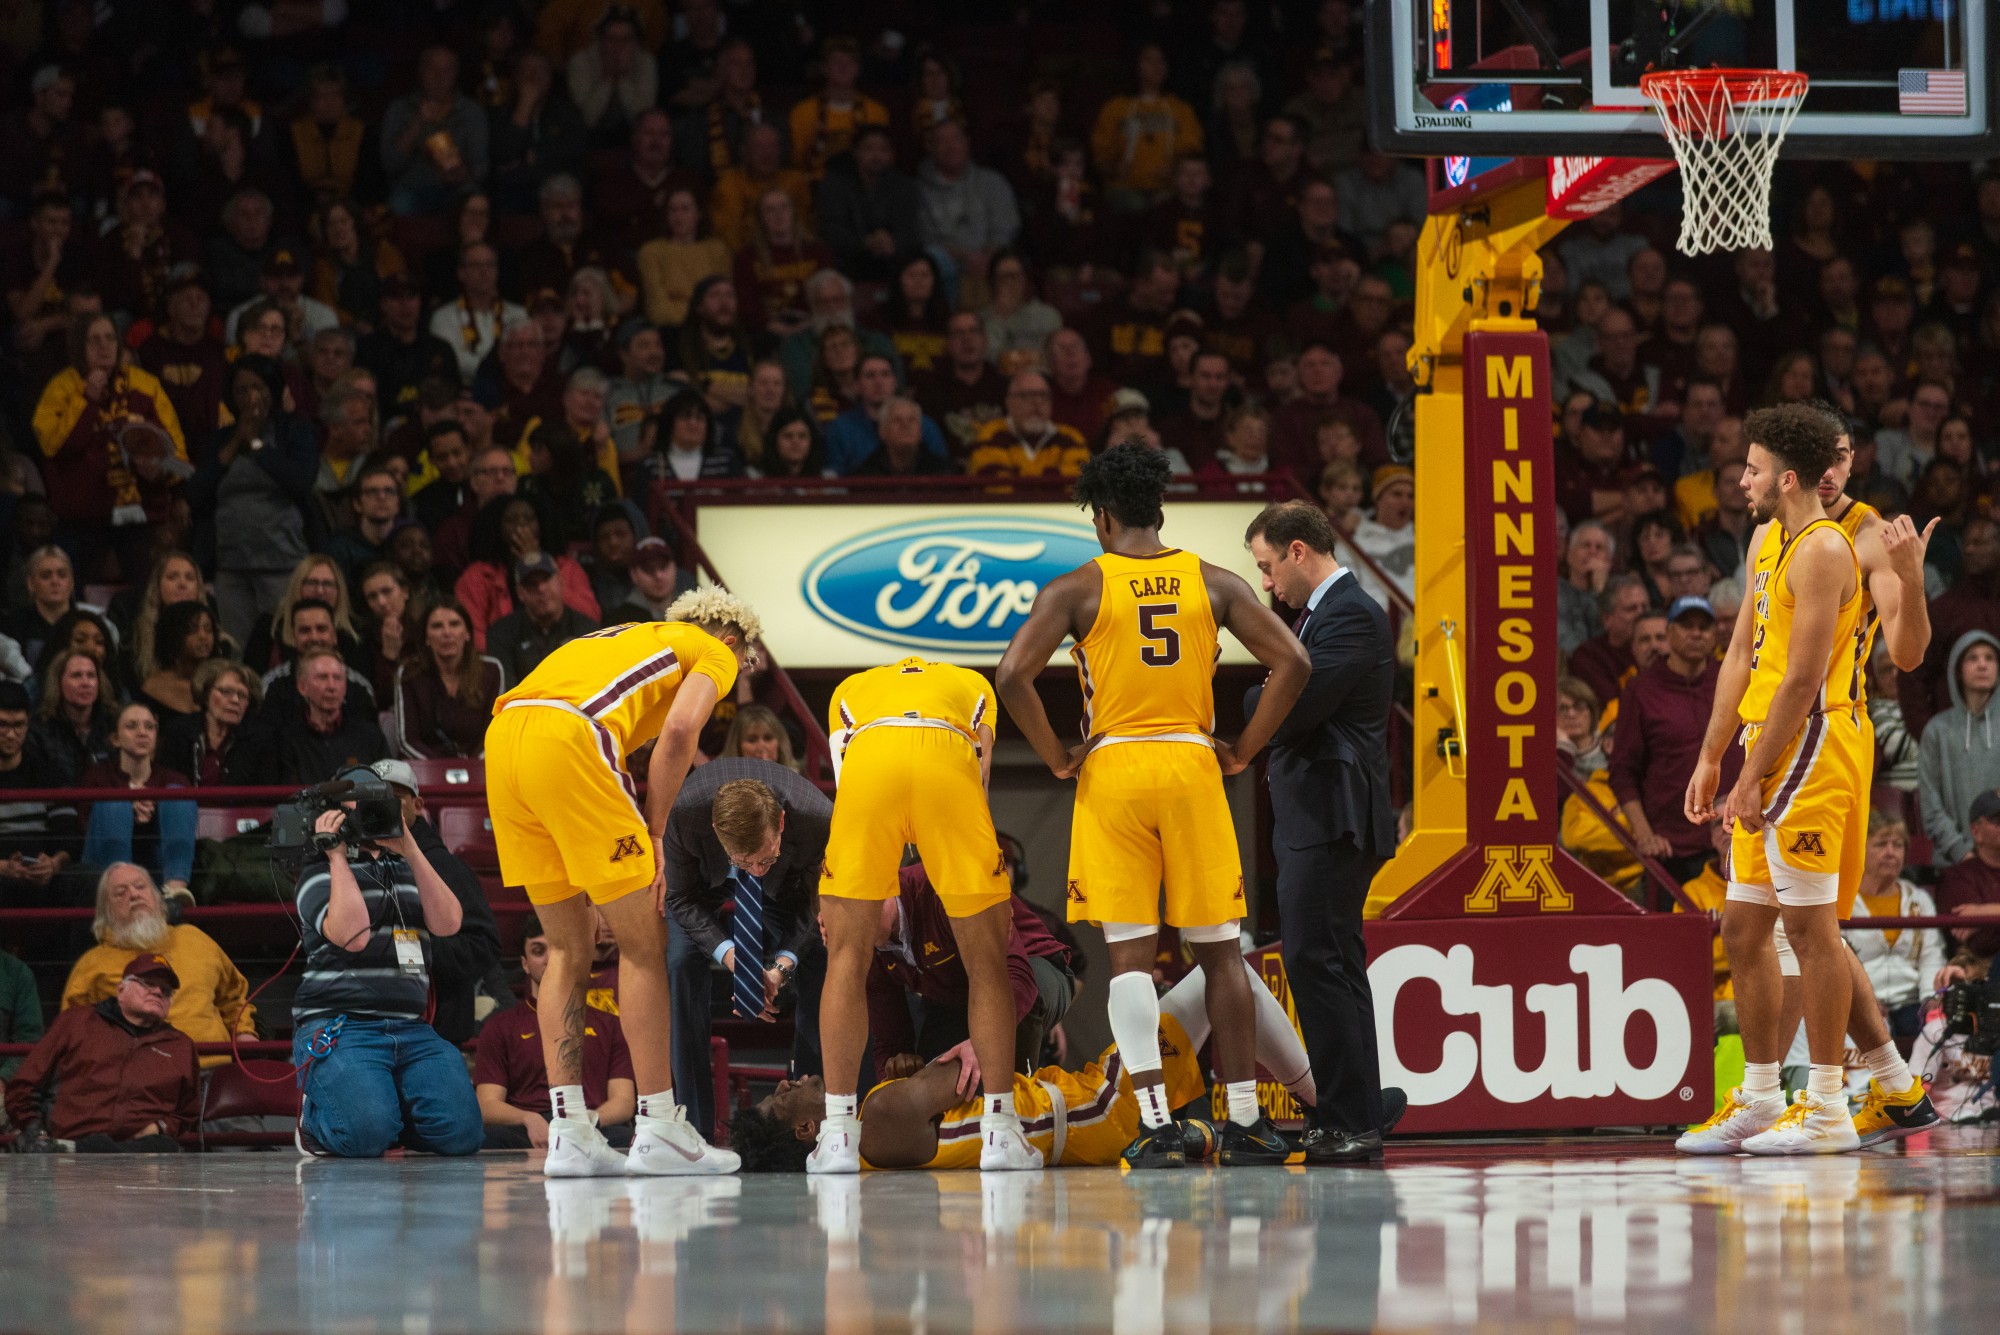 Gophers players surround Center Daniel Oturu as he lies on the floor after a foul at Williams Arena on Sunday, Jan. 12. Minnesota defeated Michigan 75-67. (Nur B. Adam / Minnesota Daily)